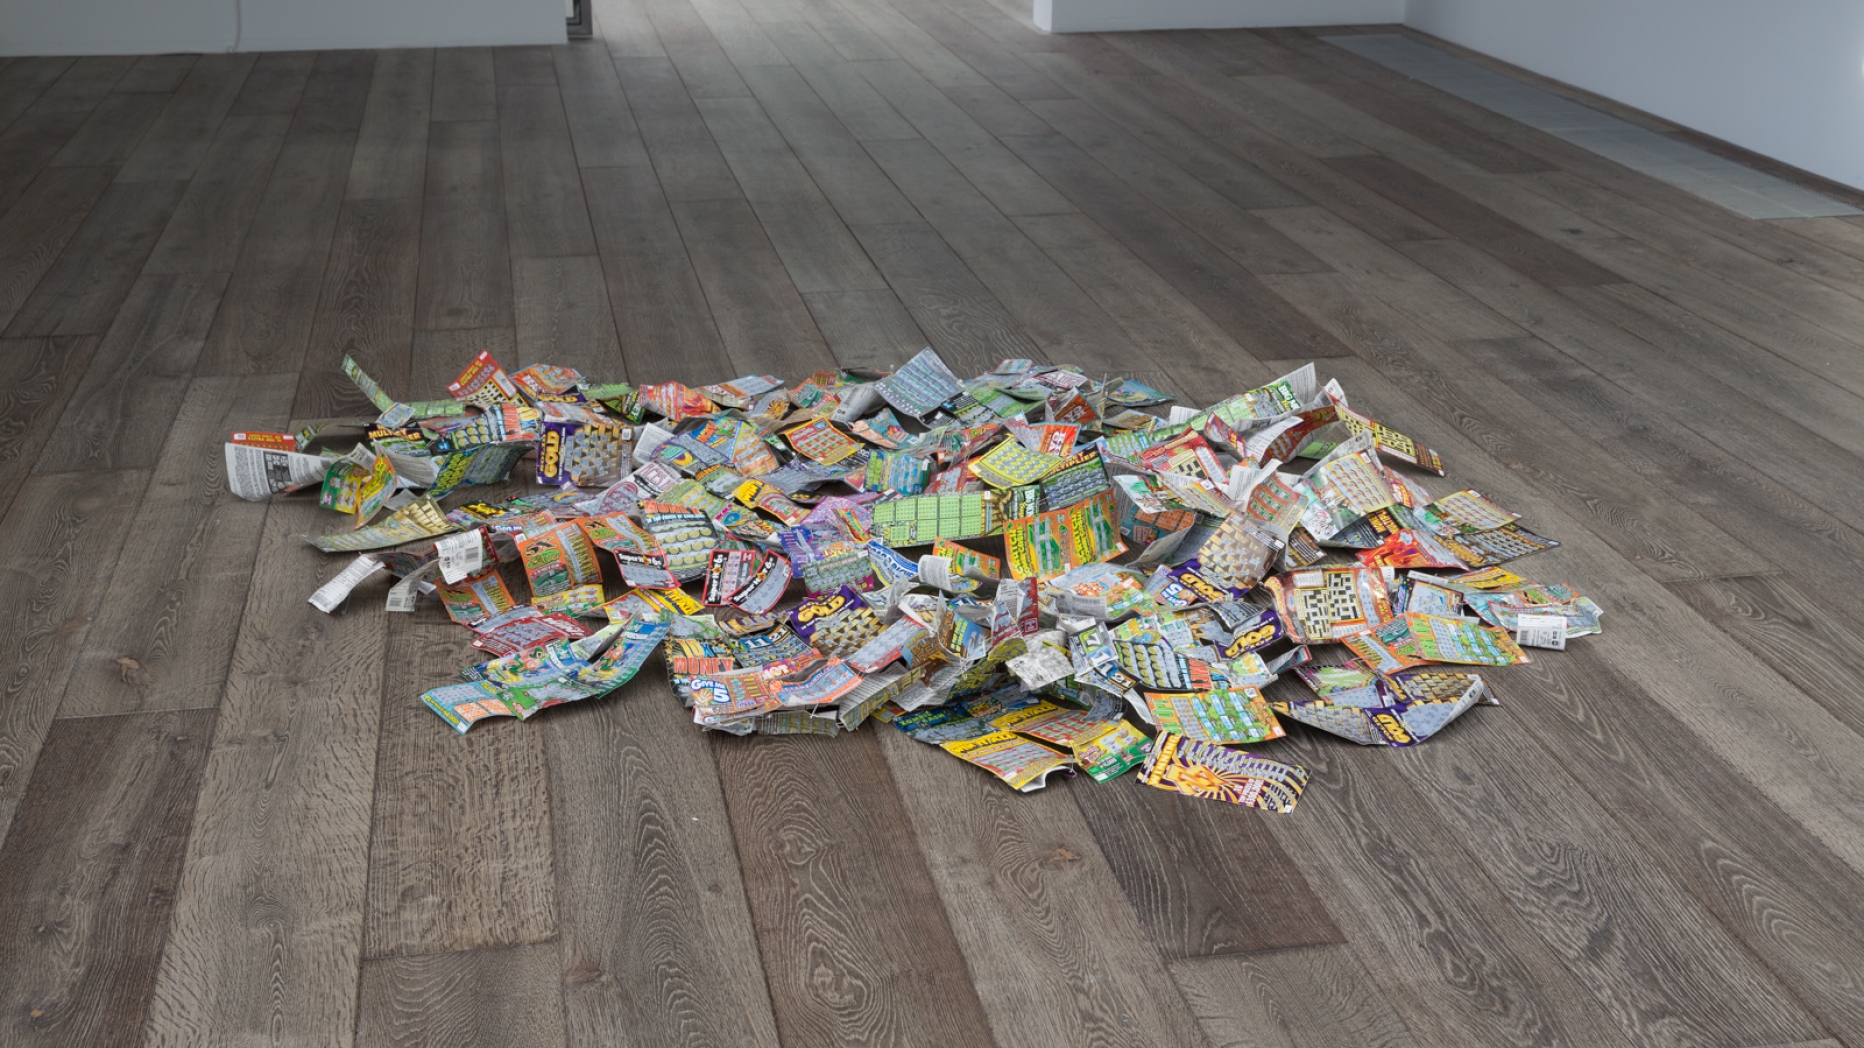 Pile of lottery tickets on the floor.